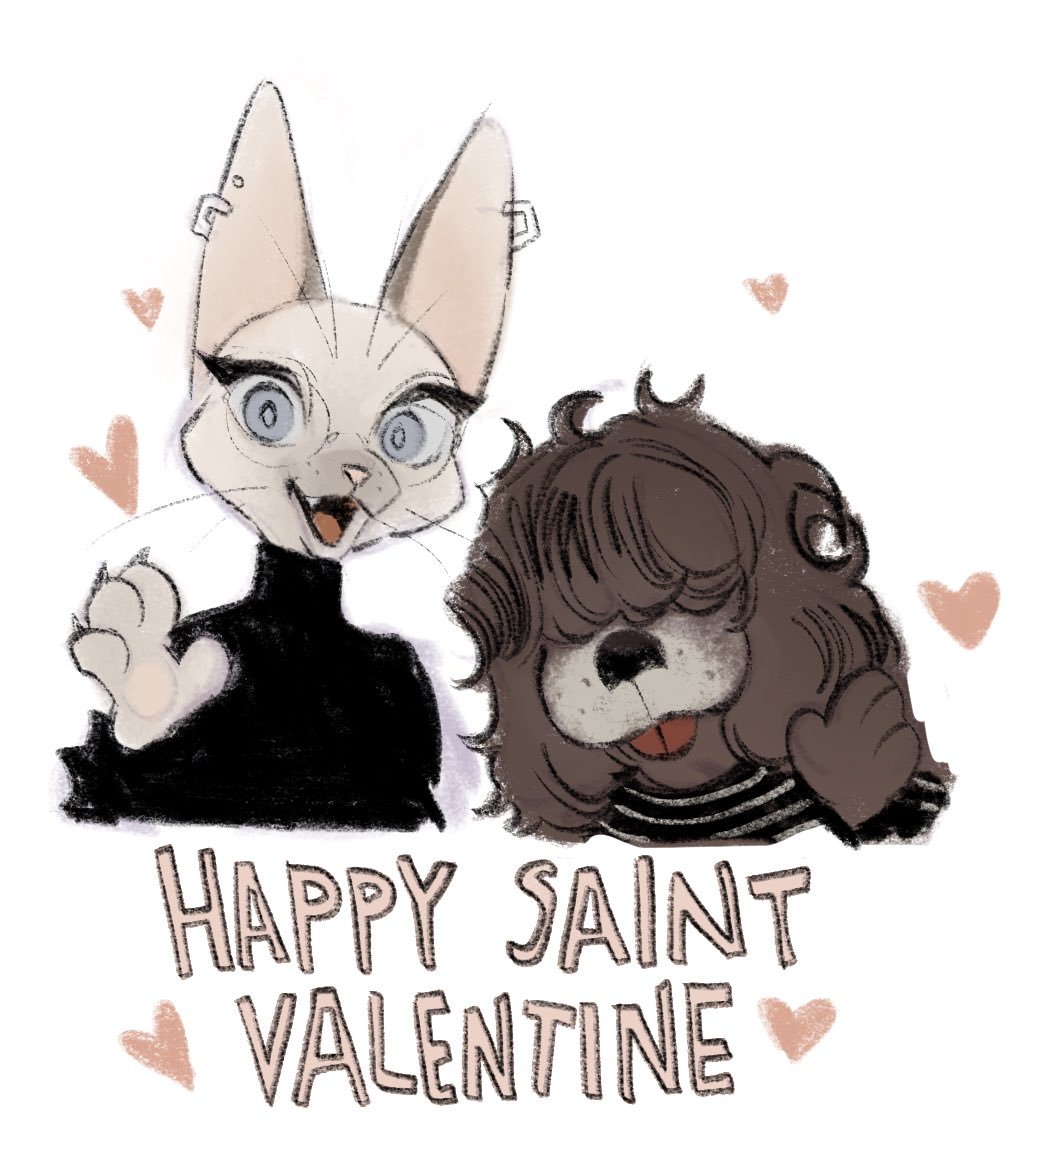 me and my bf wish you happy valentines!!